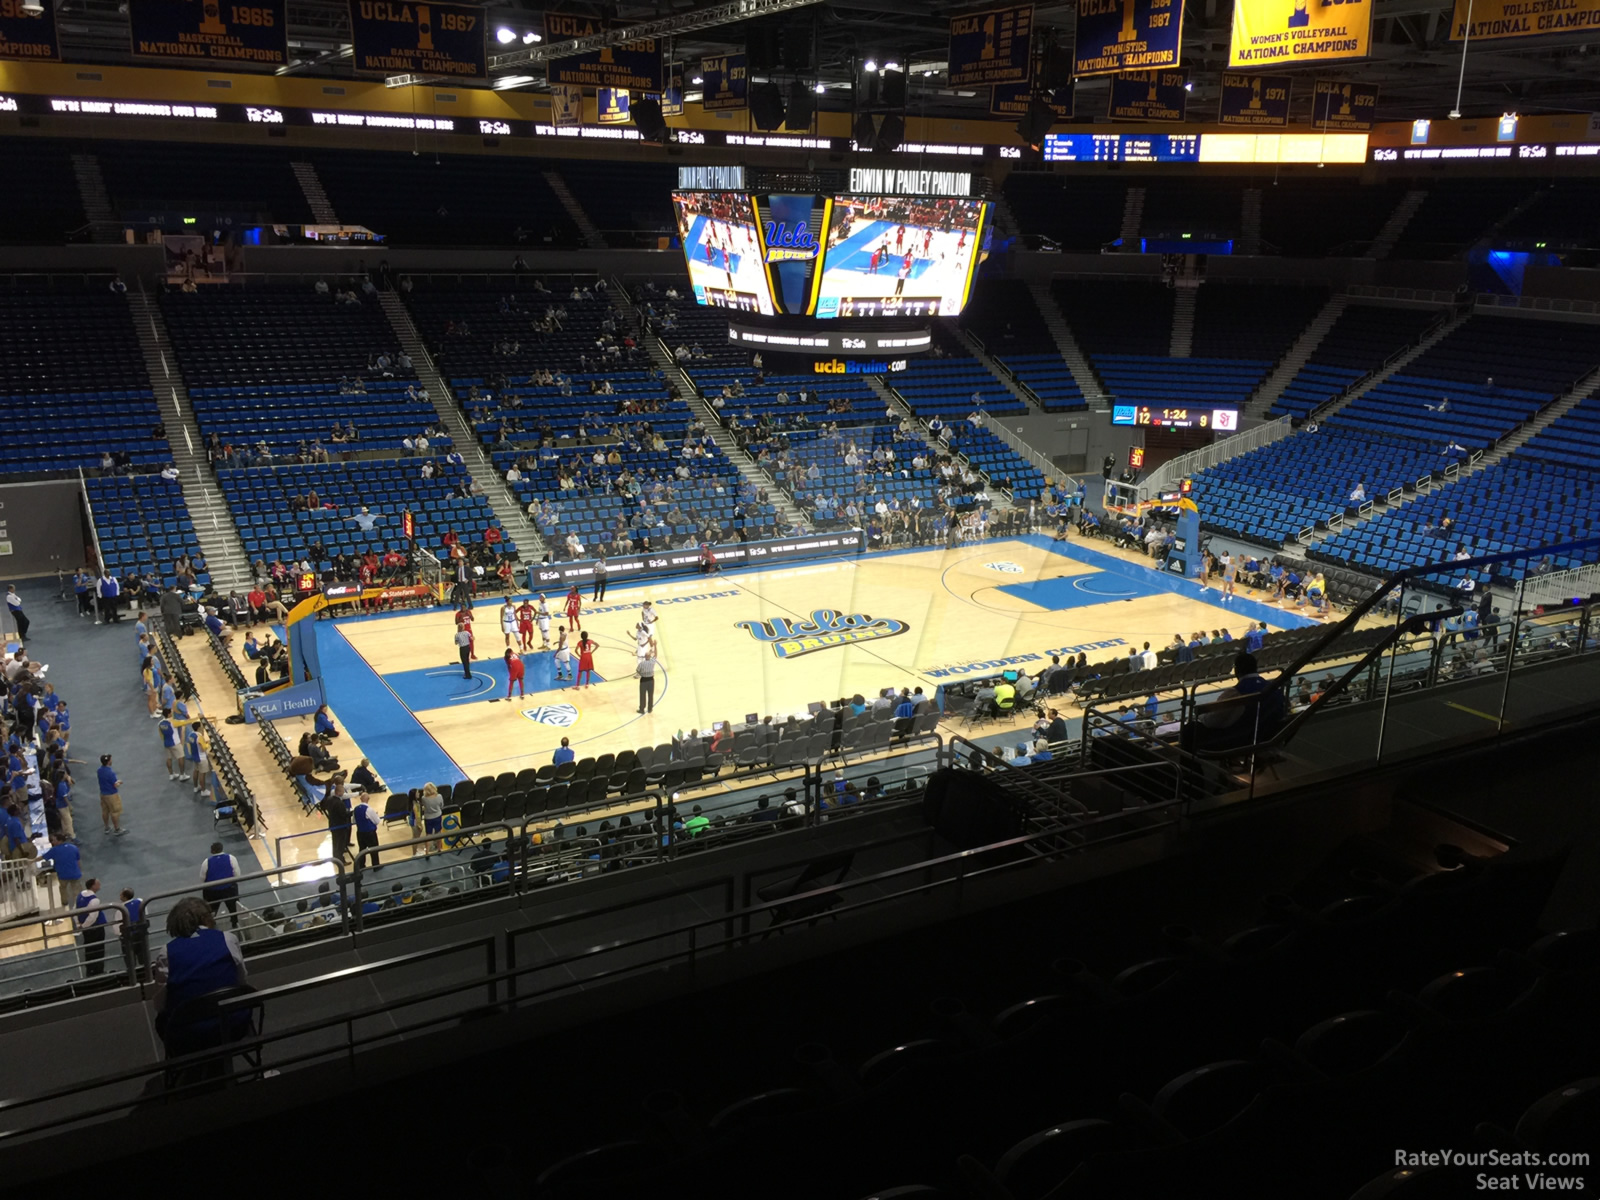 section 217, row 6 seat view  - pauley pavilion